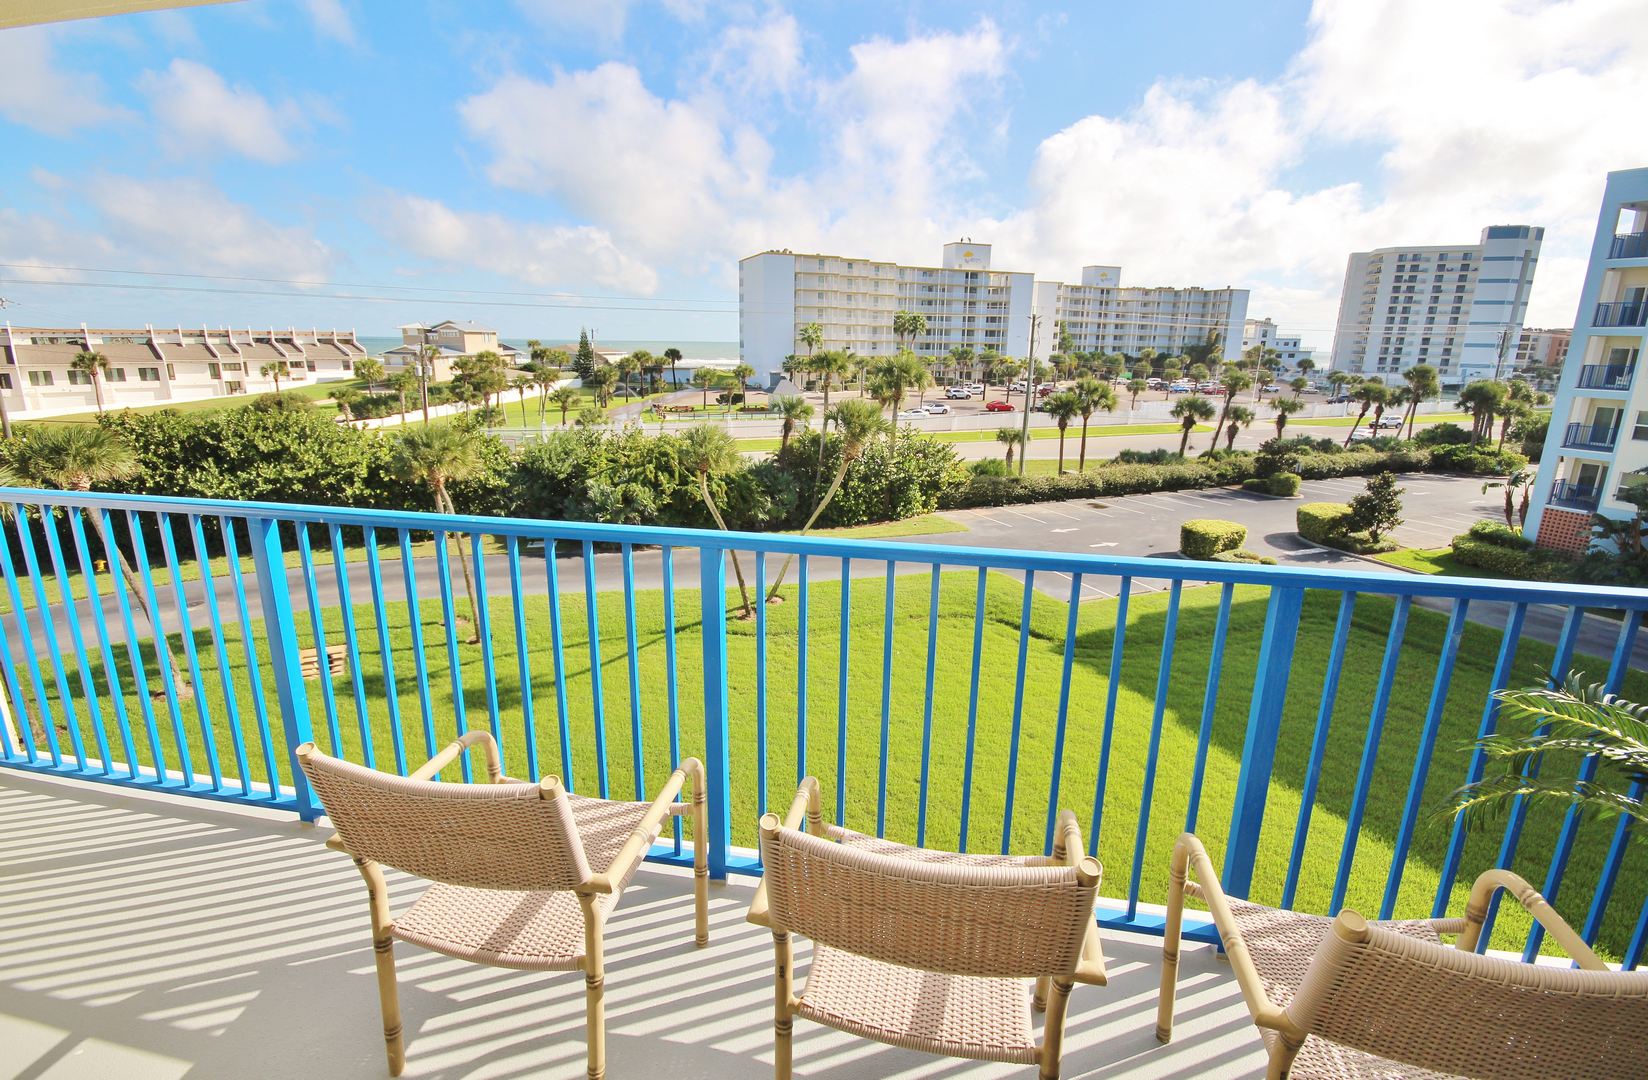 Soak up some sun on this balcony